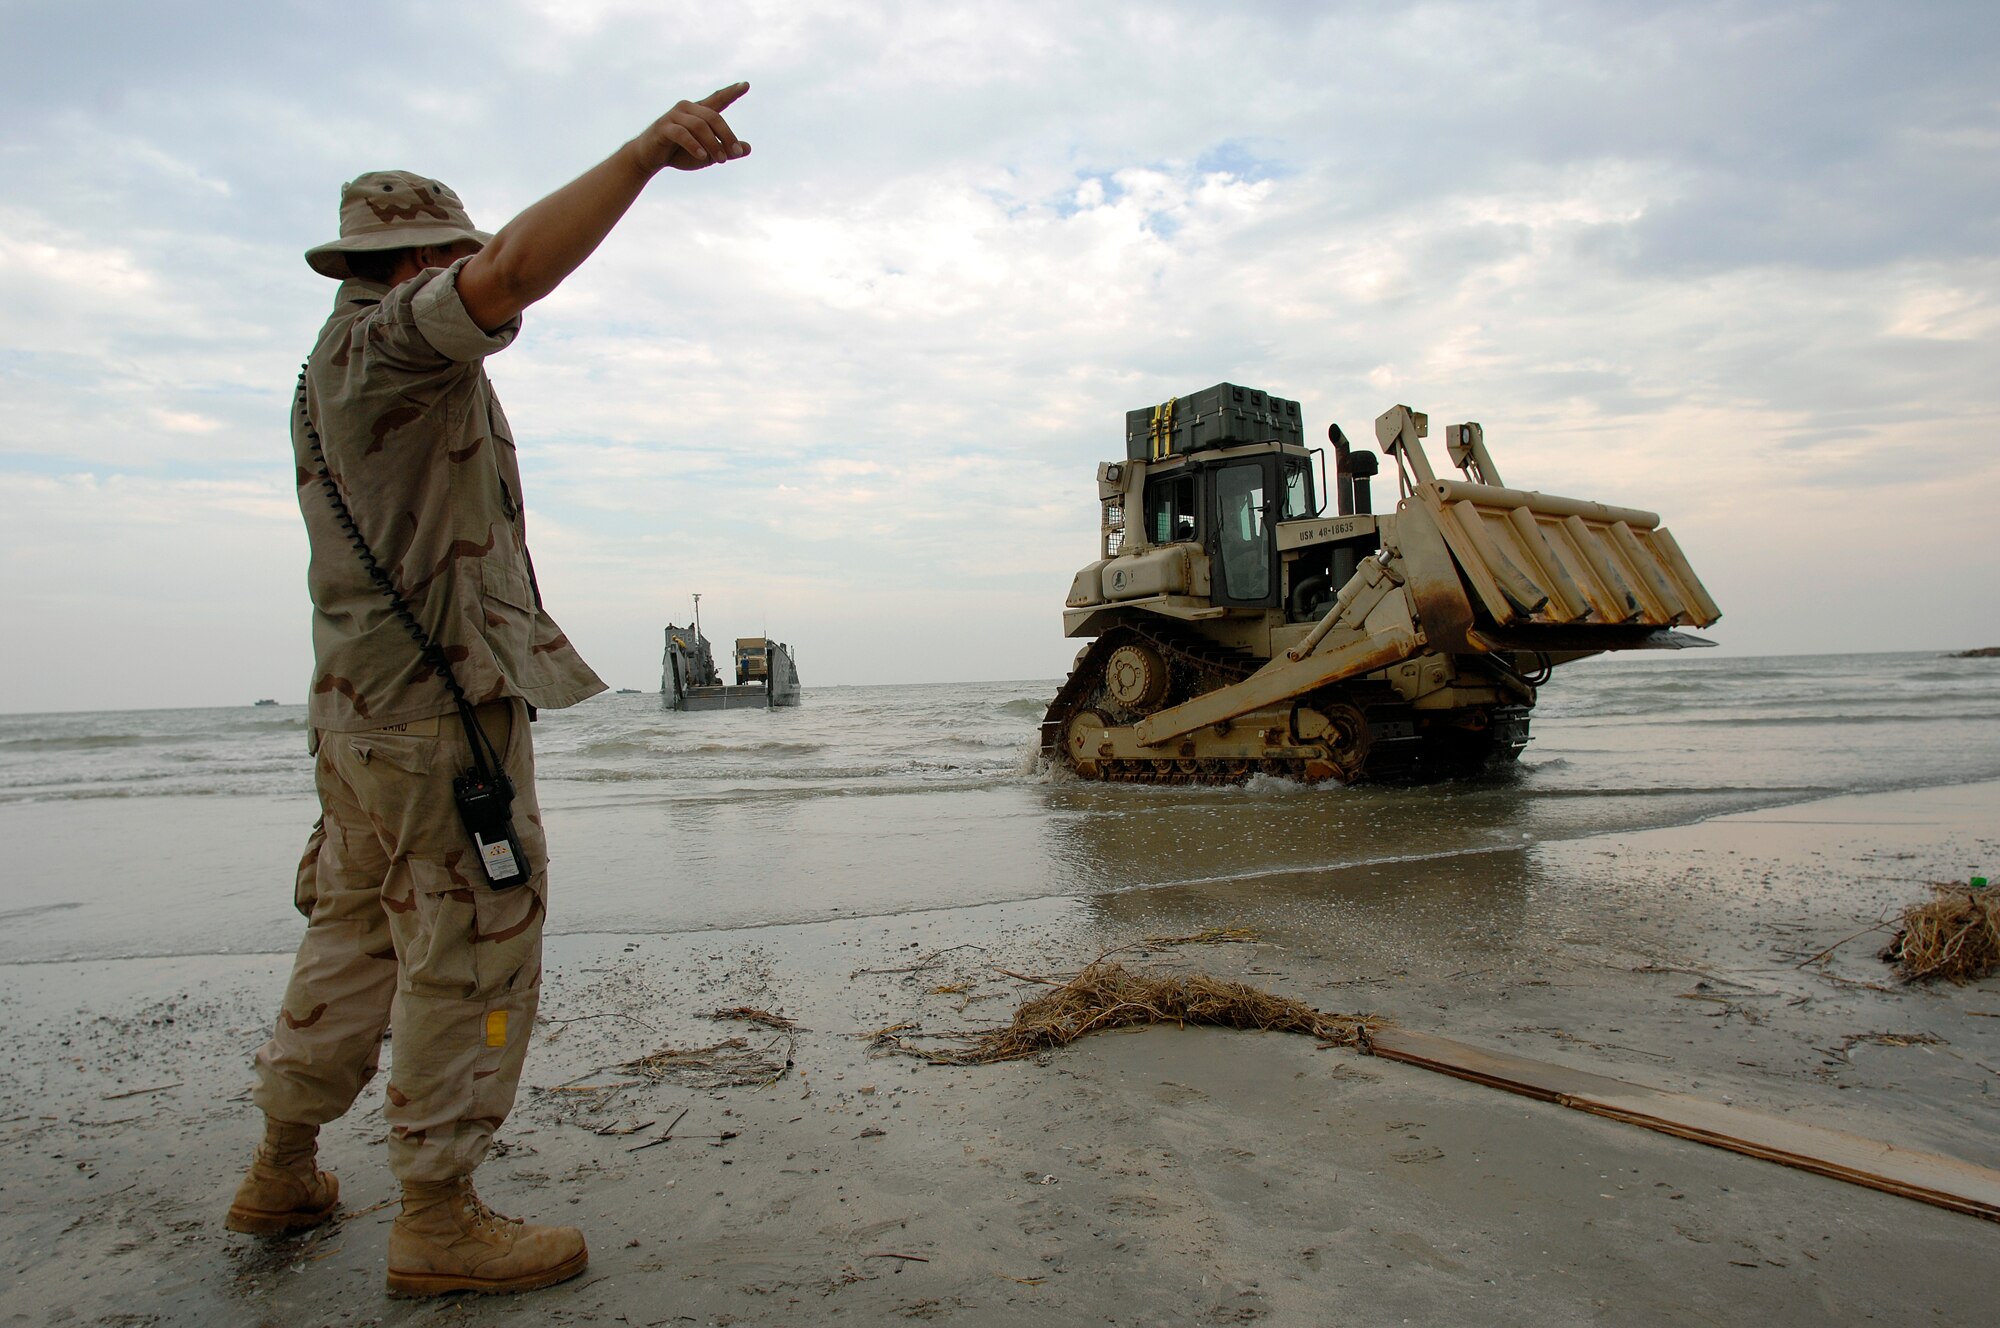 Seaman Gregory Newland directs a utility landing craft from the amphibious assault ship USS Nassau onto the beach near the port of Galveston, Texas to begin disaster relief efforts Sept. 18. The Nassau is anchored off Galveston to provide disaster response and aid to civil authorities as directed in the wake of Hurricane Ike. Seaman  Newland is assigned to Beachmaster Unit Two. (U.S. Air Force photo/Staff Sgt. Bennie J. Davis III)